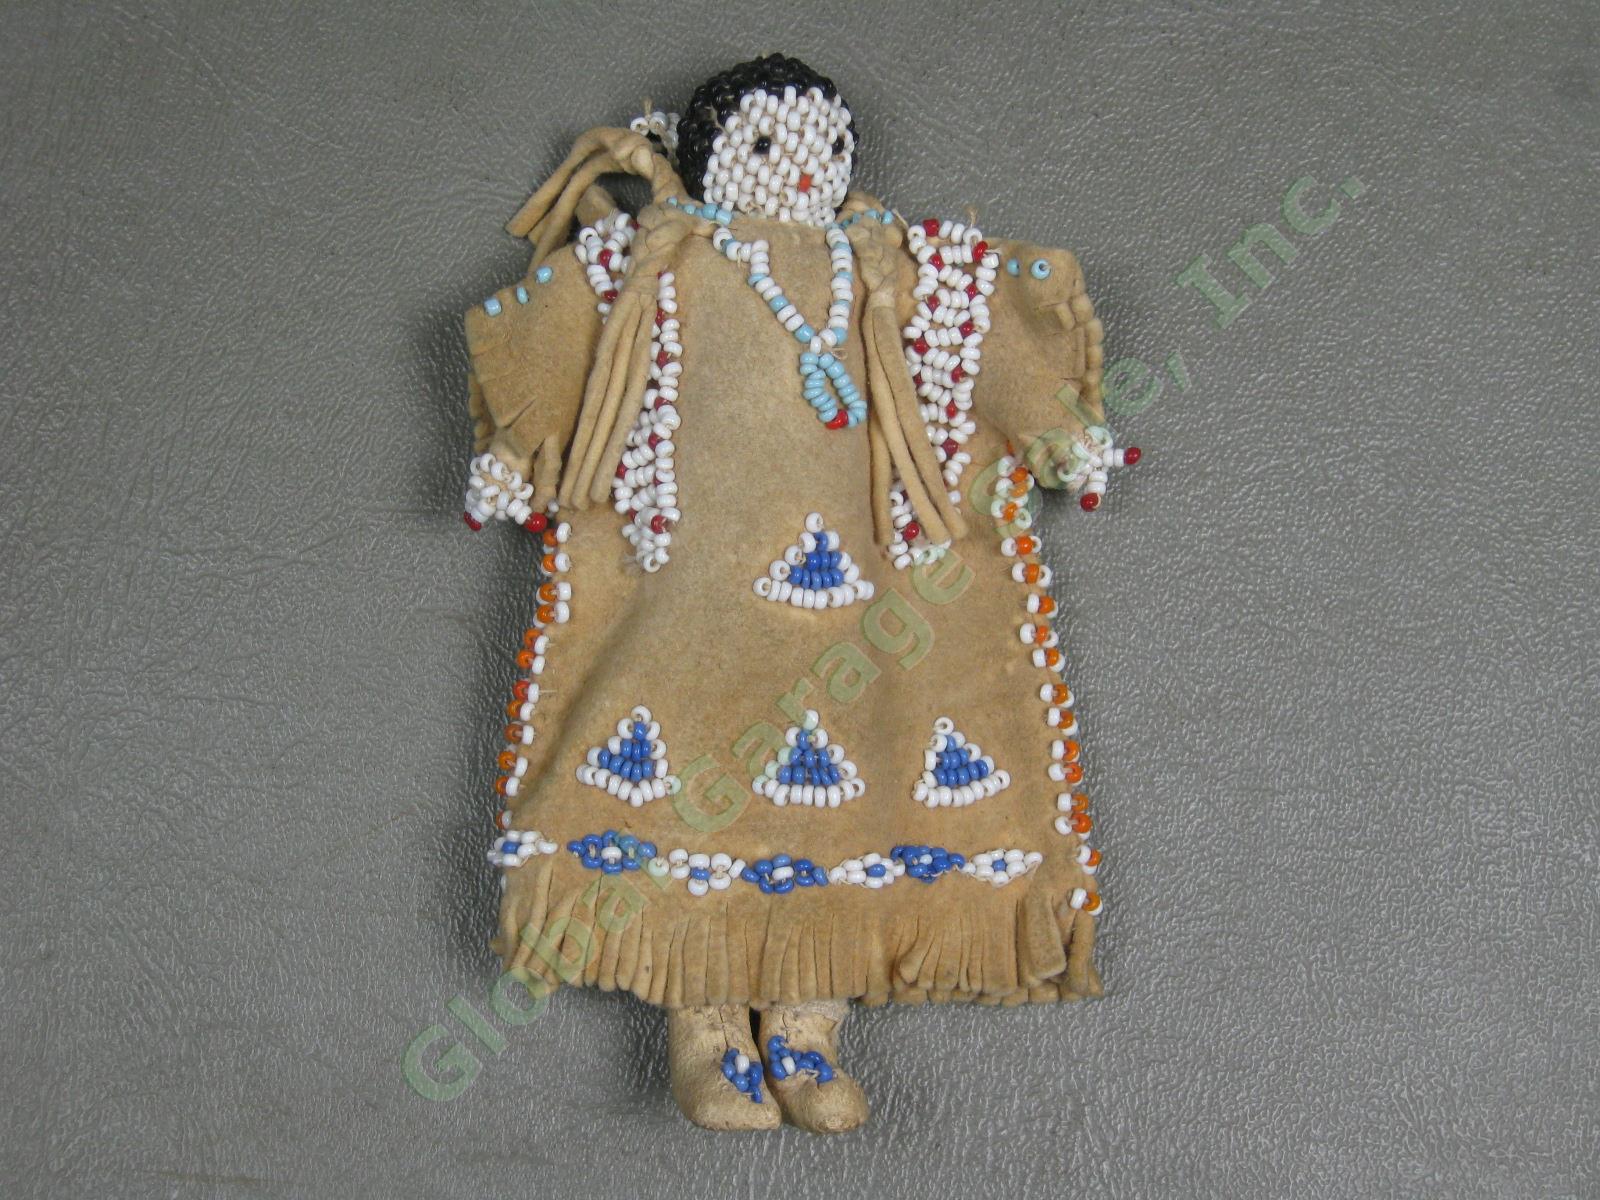 6 Vtg Antique 1940s Navajo Native American Indian Cloth Doll Lot Weaving Beaded 5